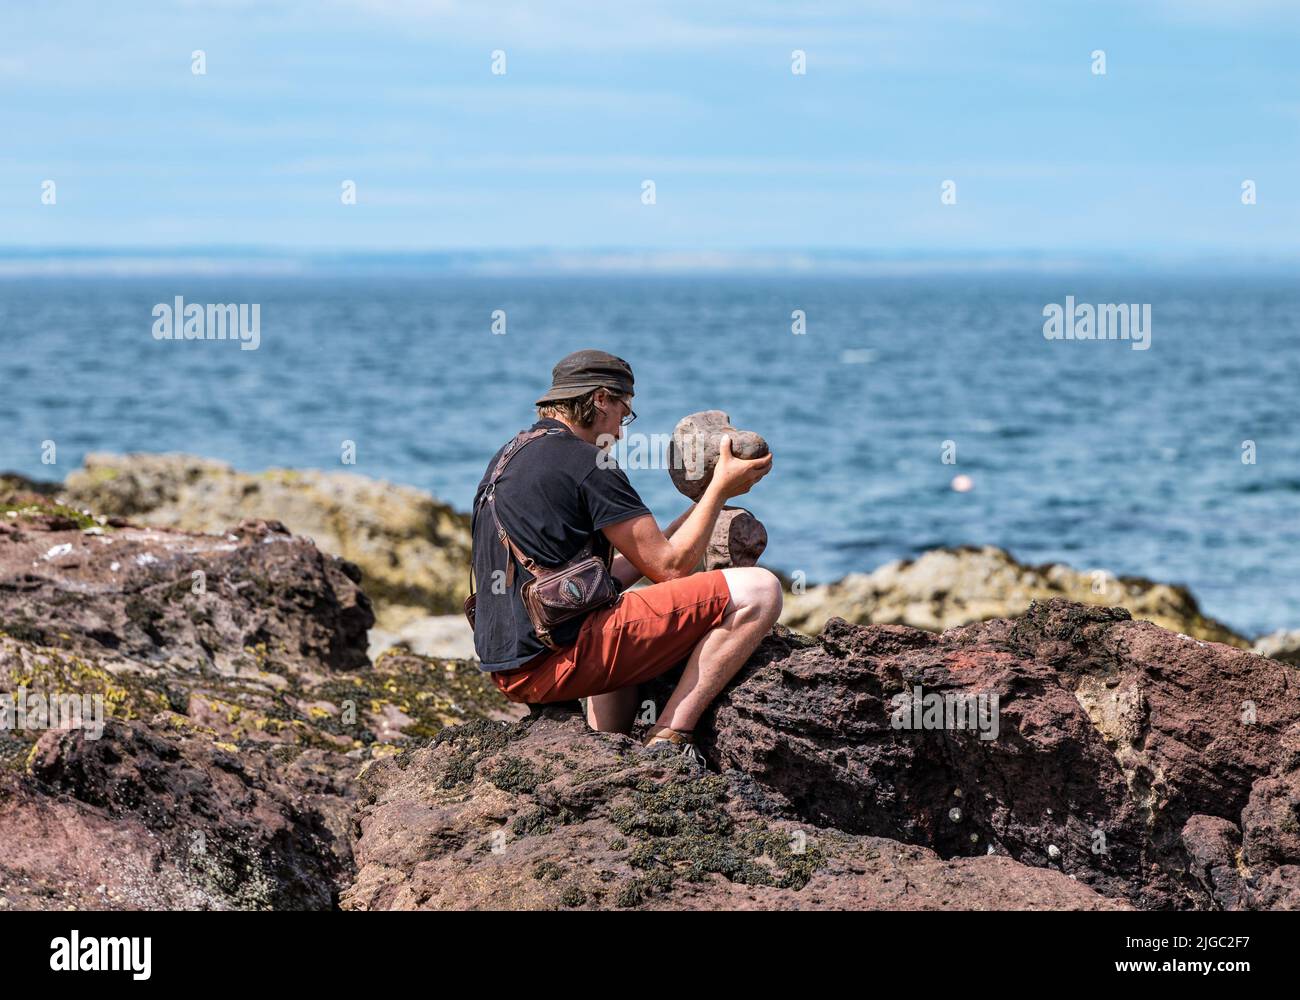 Dunbar, East Lothian, Scotland, UK, 9th July 2022. European Stone Stacking Championship: participants have 3.5 hours to create an artistic artwork from the rocks on Eye Cave Beach. Pictured: Michael Grab, stone stacker Stock Photo